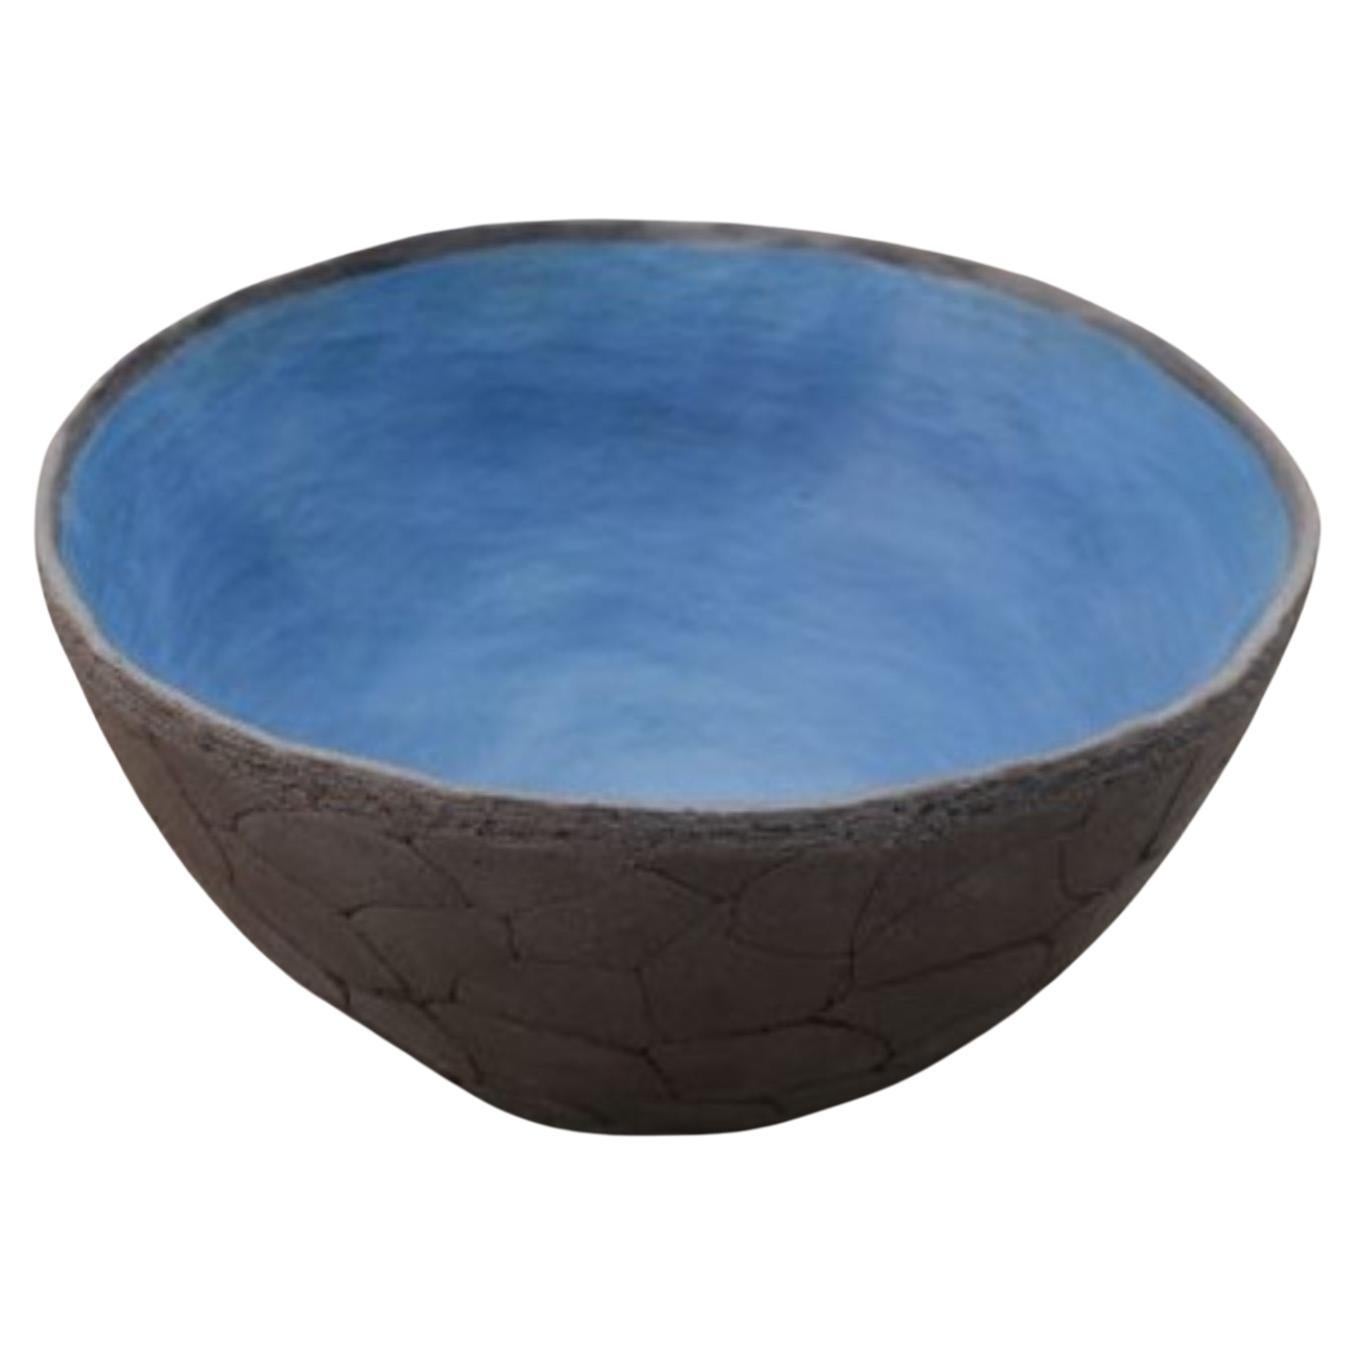 Small, High Bowl by Atelier Ledure